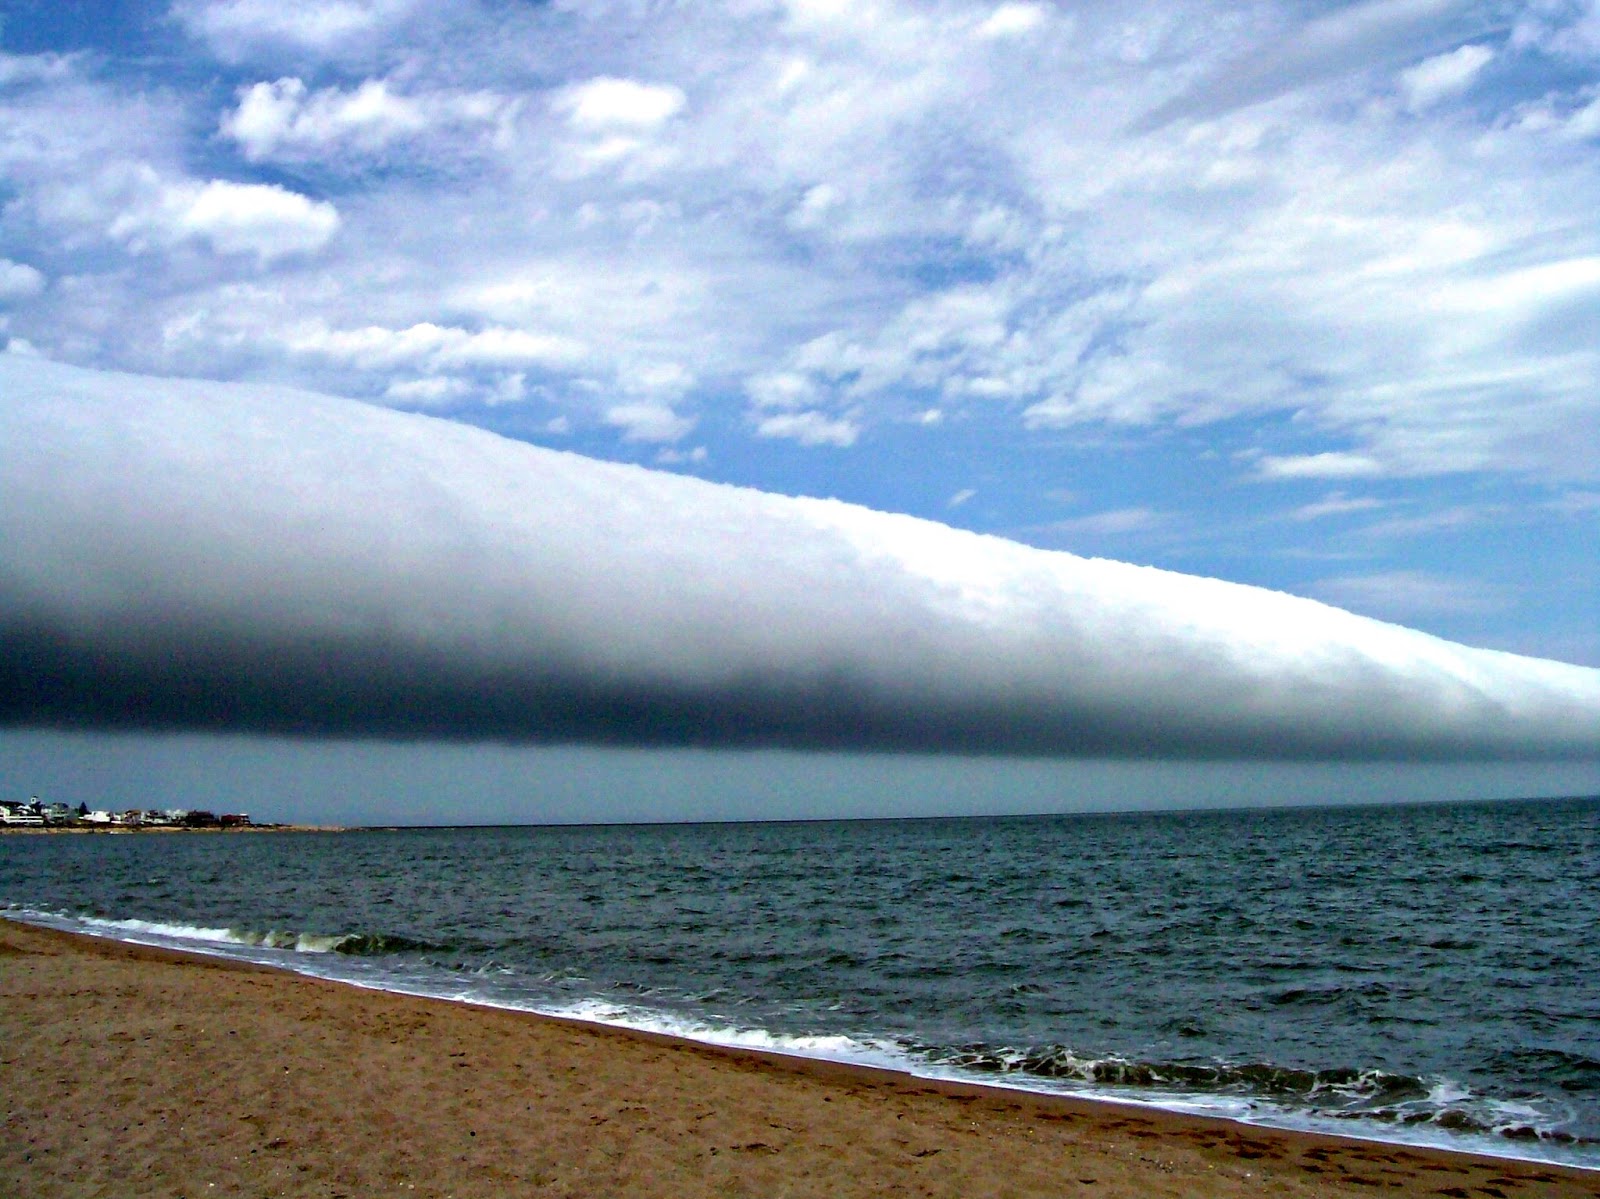 MorgansLists: 10 of the Most Unusual Cloud Formations